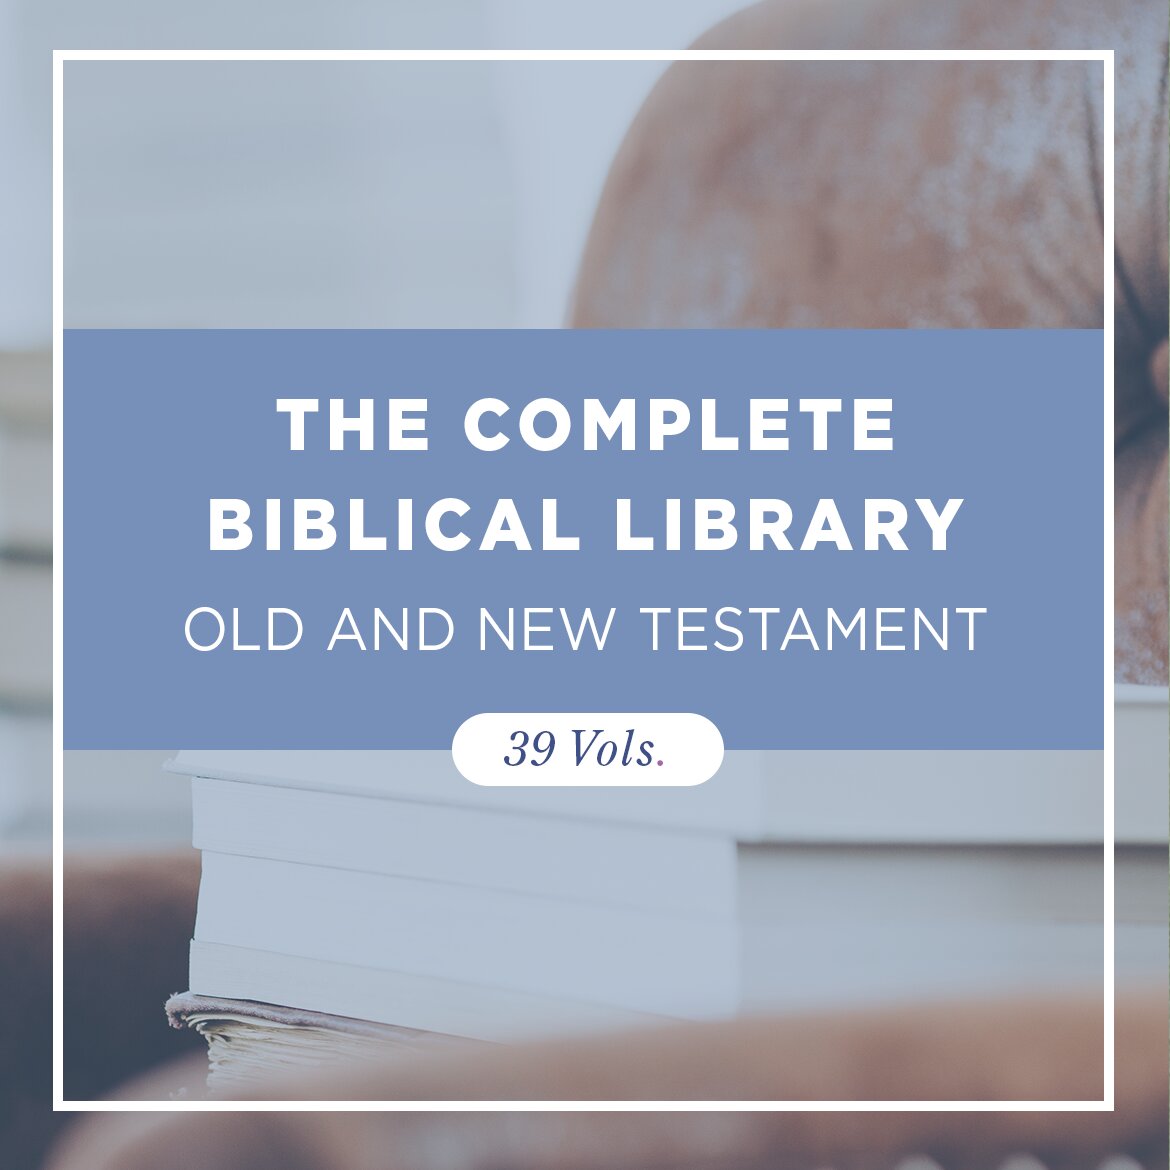 The Complete Biblical Library Old and New Testament (39 vols.)